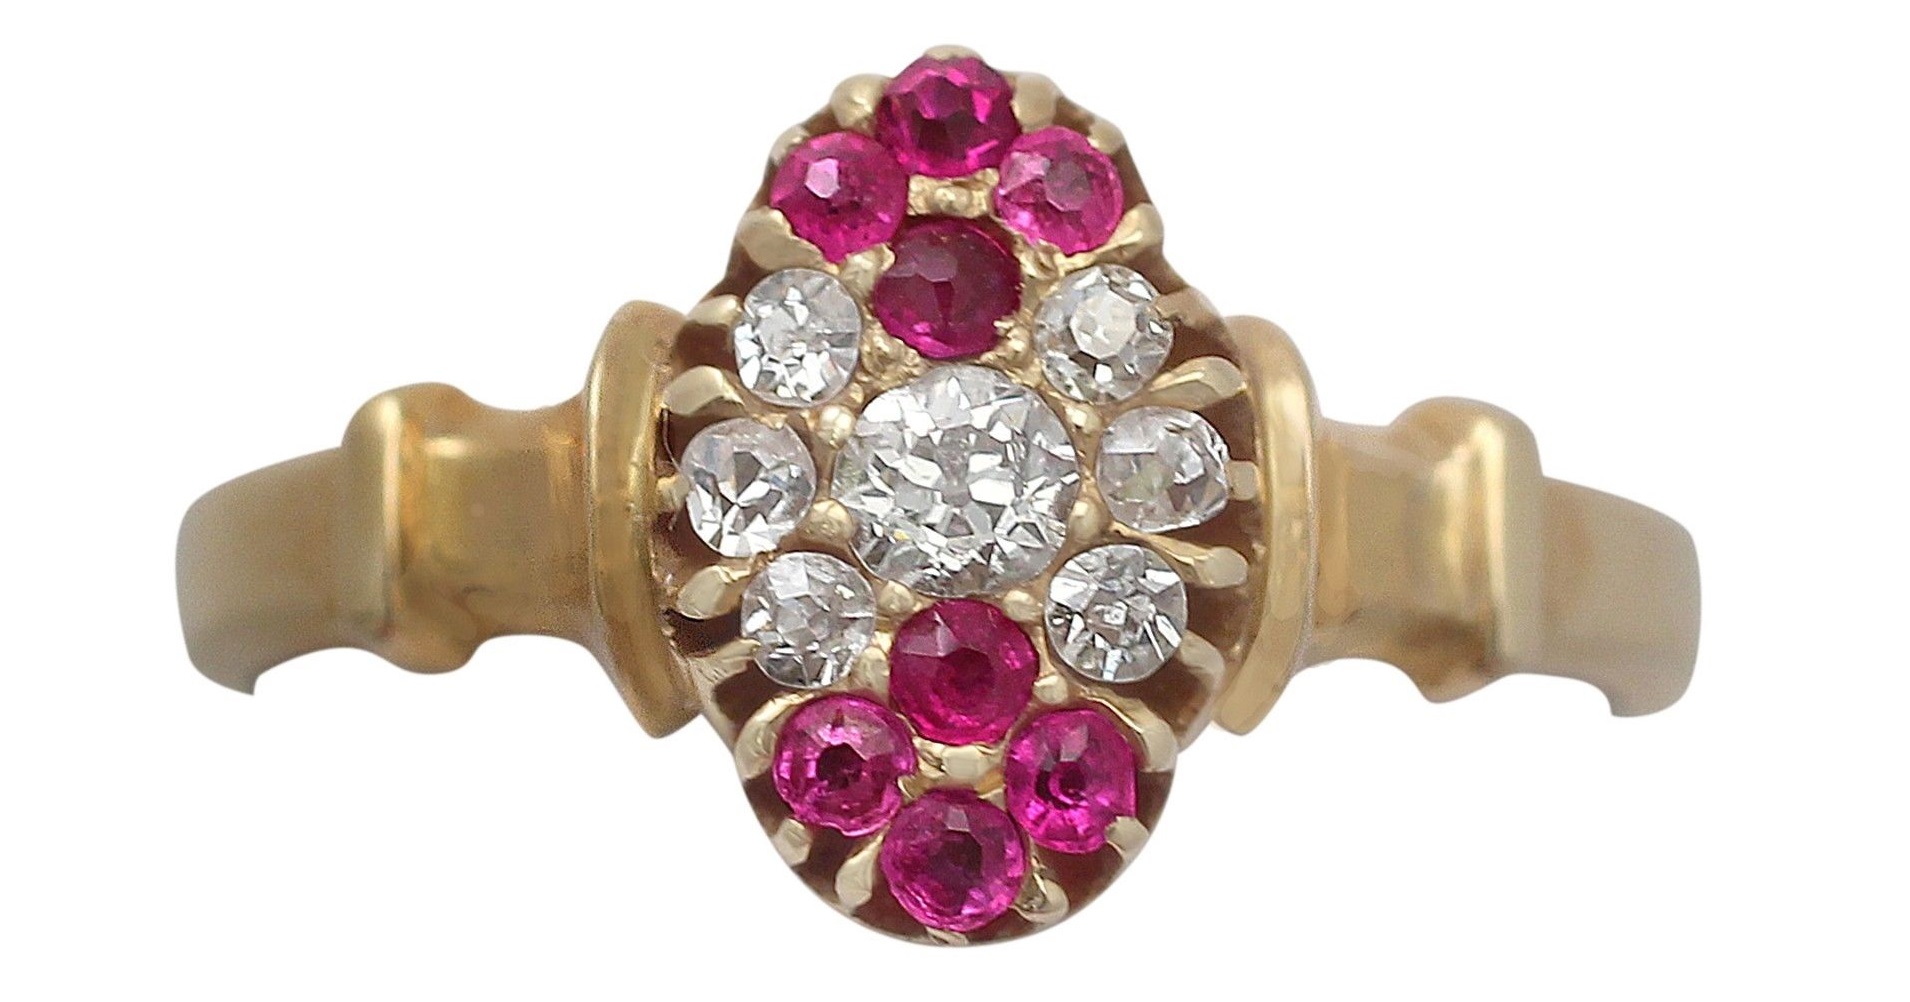 Antique Edwardian, Diamond and Ruby, 18k Yellow Gold Dress Ring - 1905